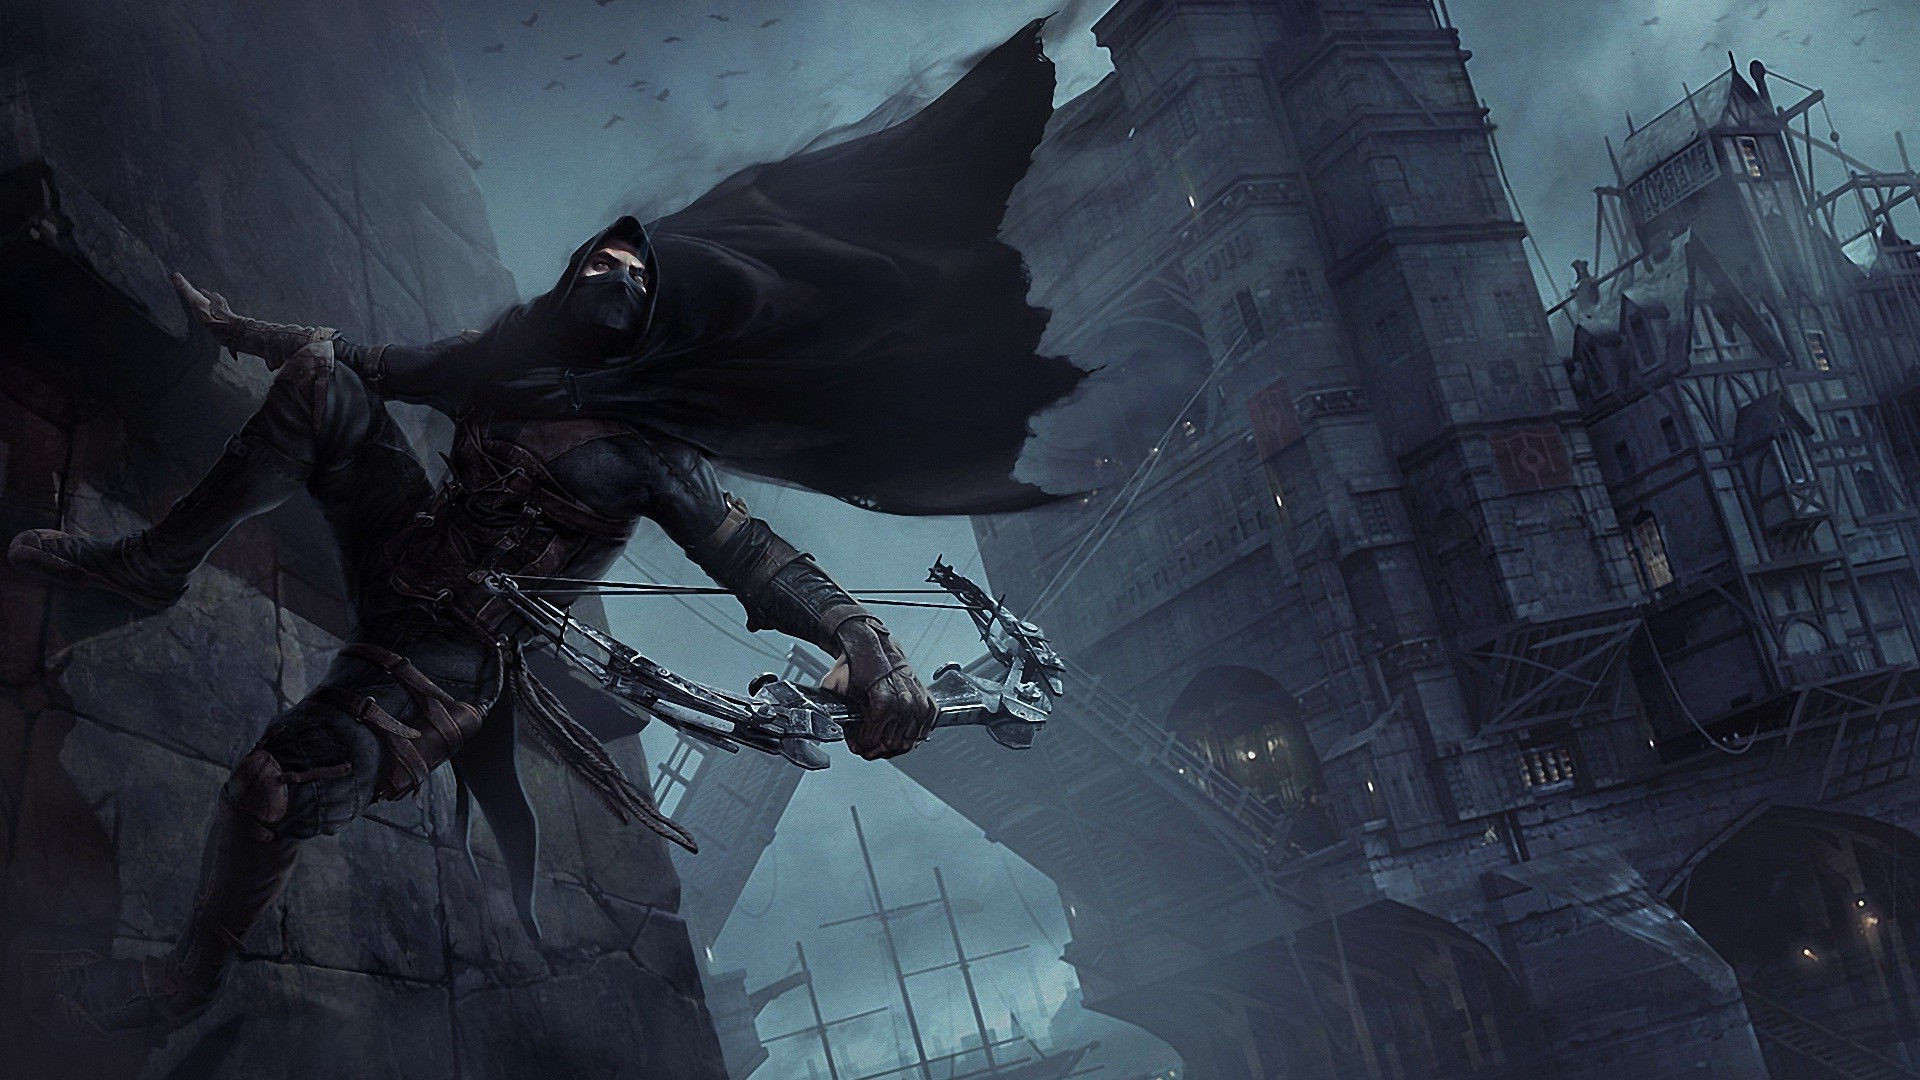 1920x1080 Best images and wallpapers of thief game 2014.